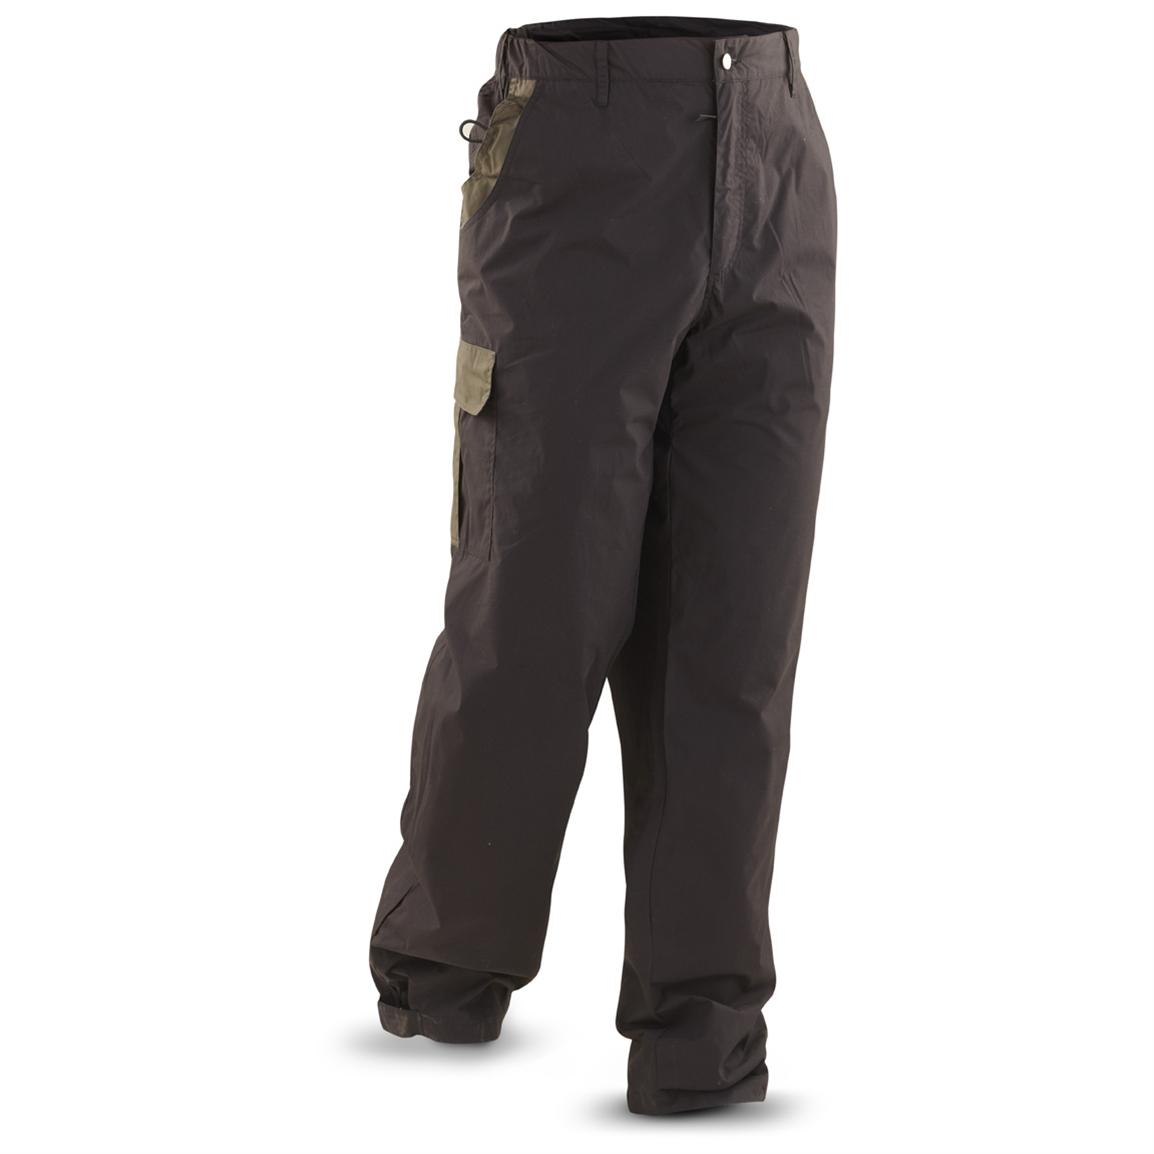 MERRTO Brand Mens Joggers Outdoor Pants Hiking Quick Dry